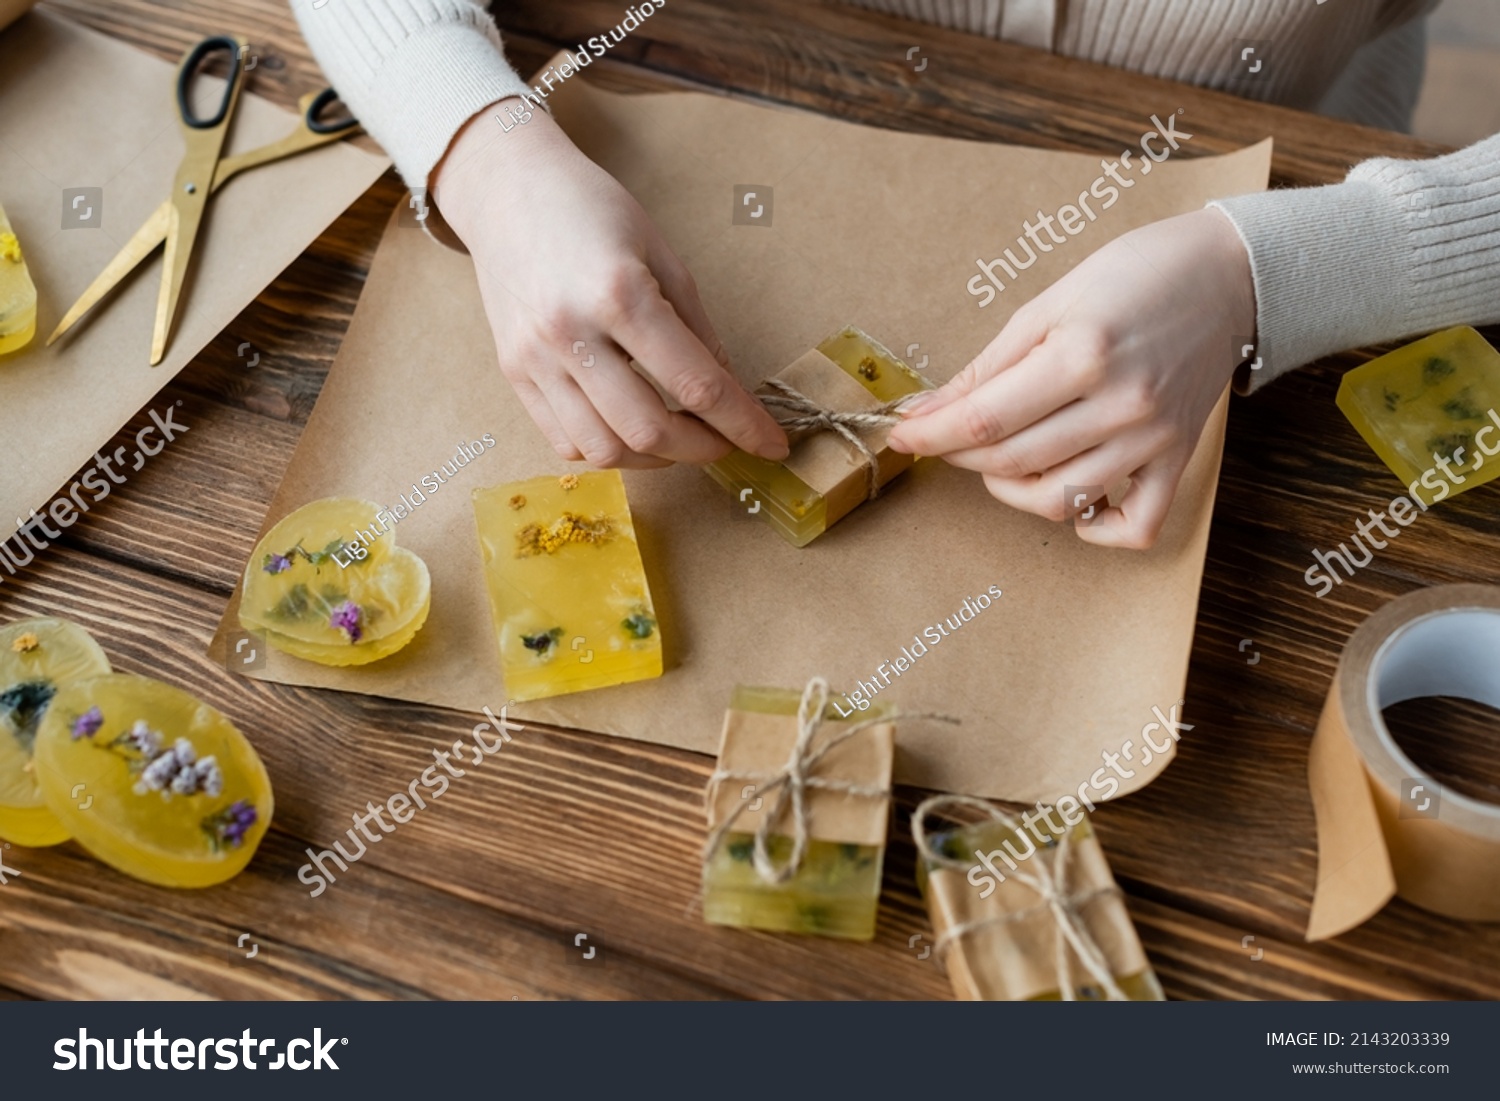 craftswoman packaging handmade soap on craft paper on table #2143203339